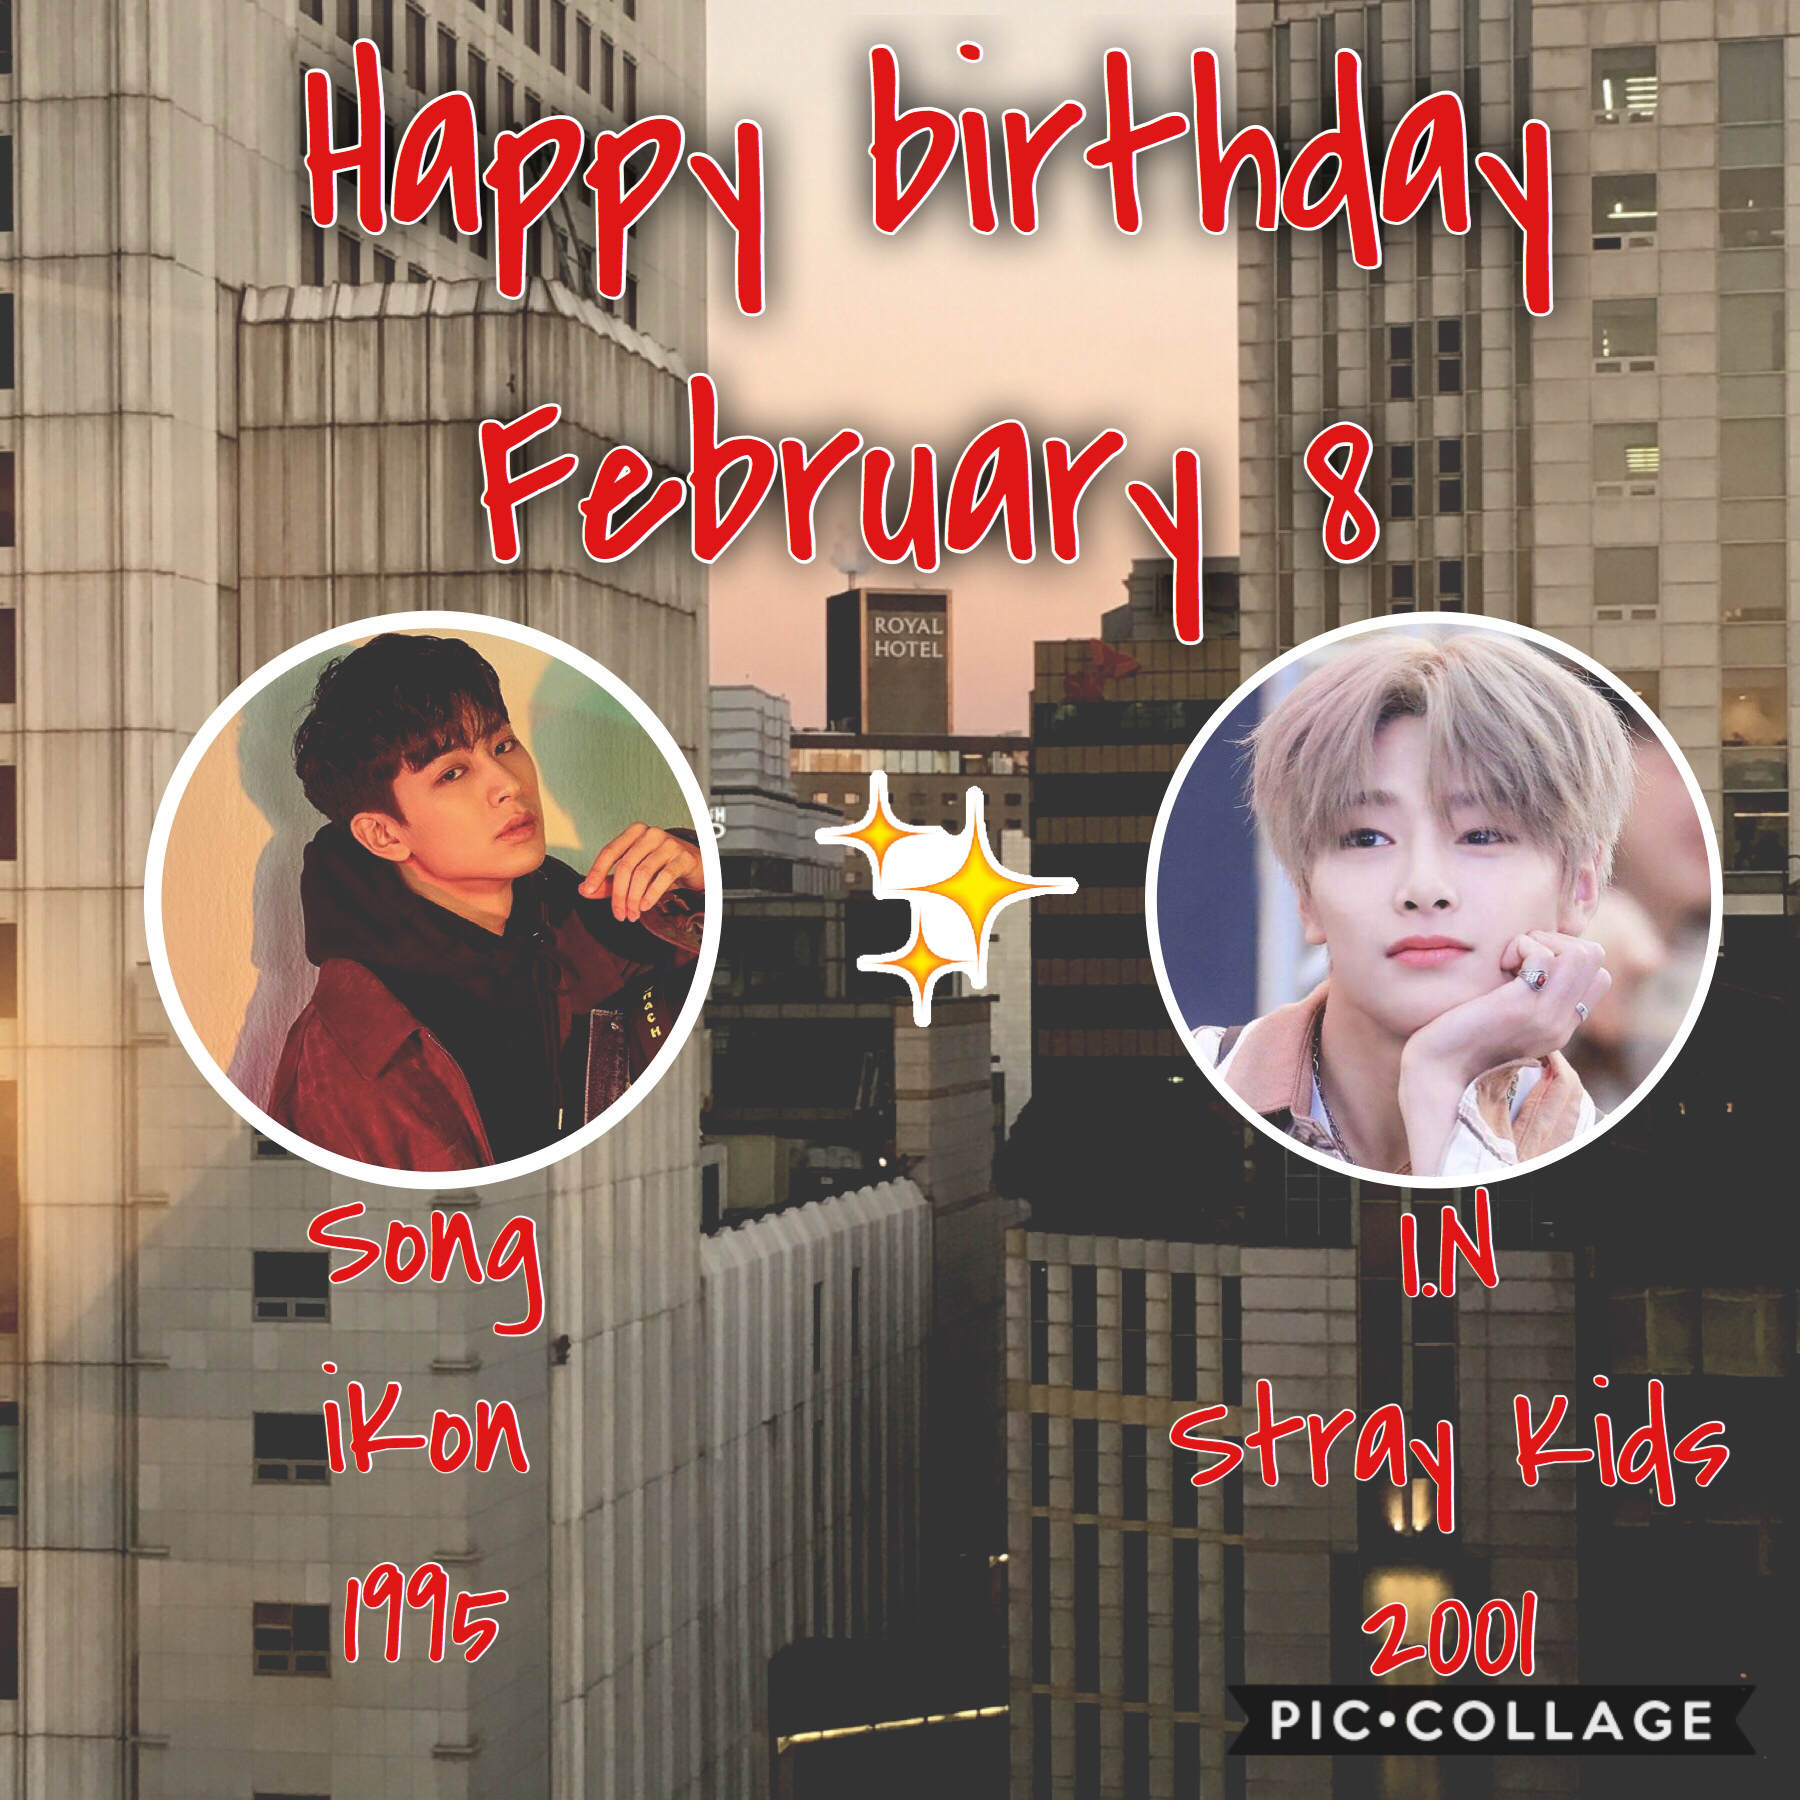 •🎈❄️•
Happy birthday!!! I can’t believe Jeongin is 19 now 🥺🥺🥺 
Other birthdays:
•INFINITE’s Woohyun
☃️❄️~Whoop~❄️☃️